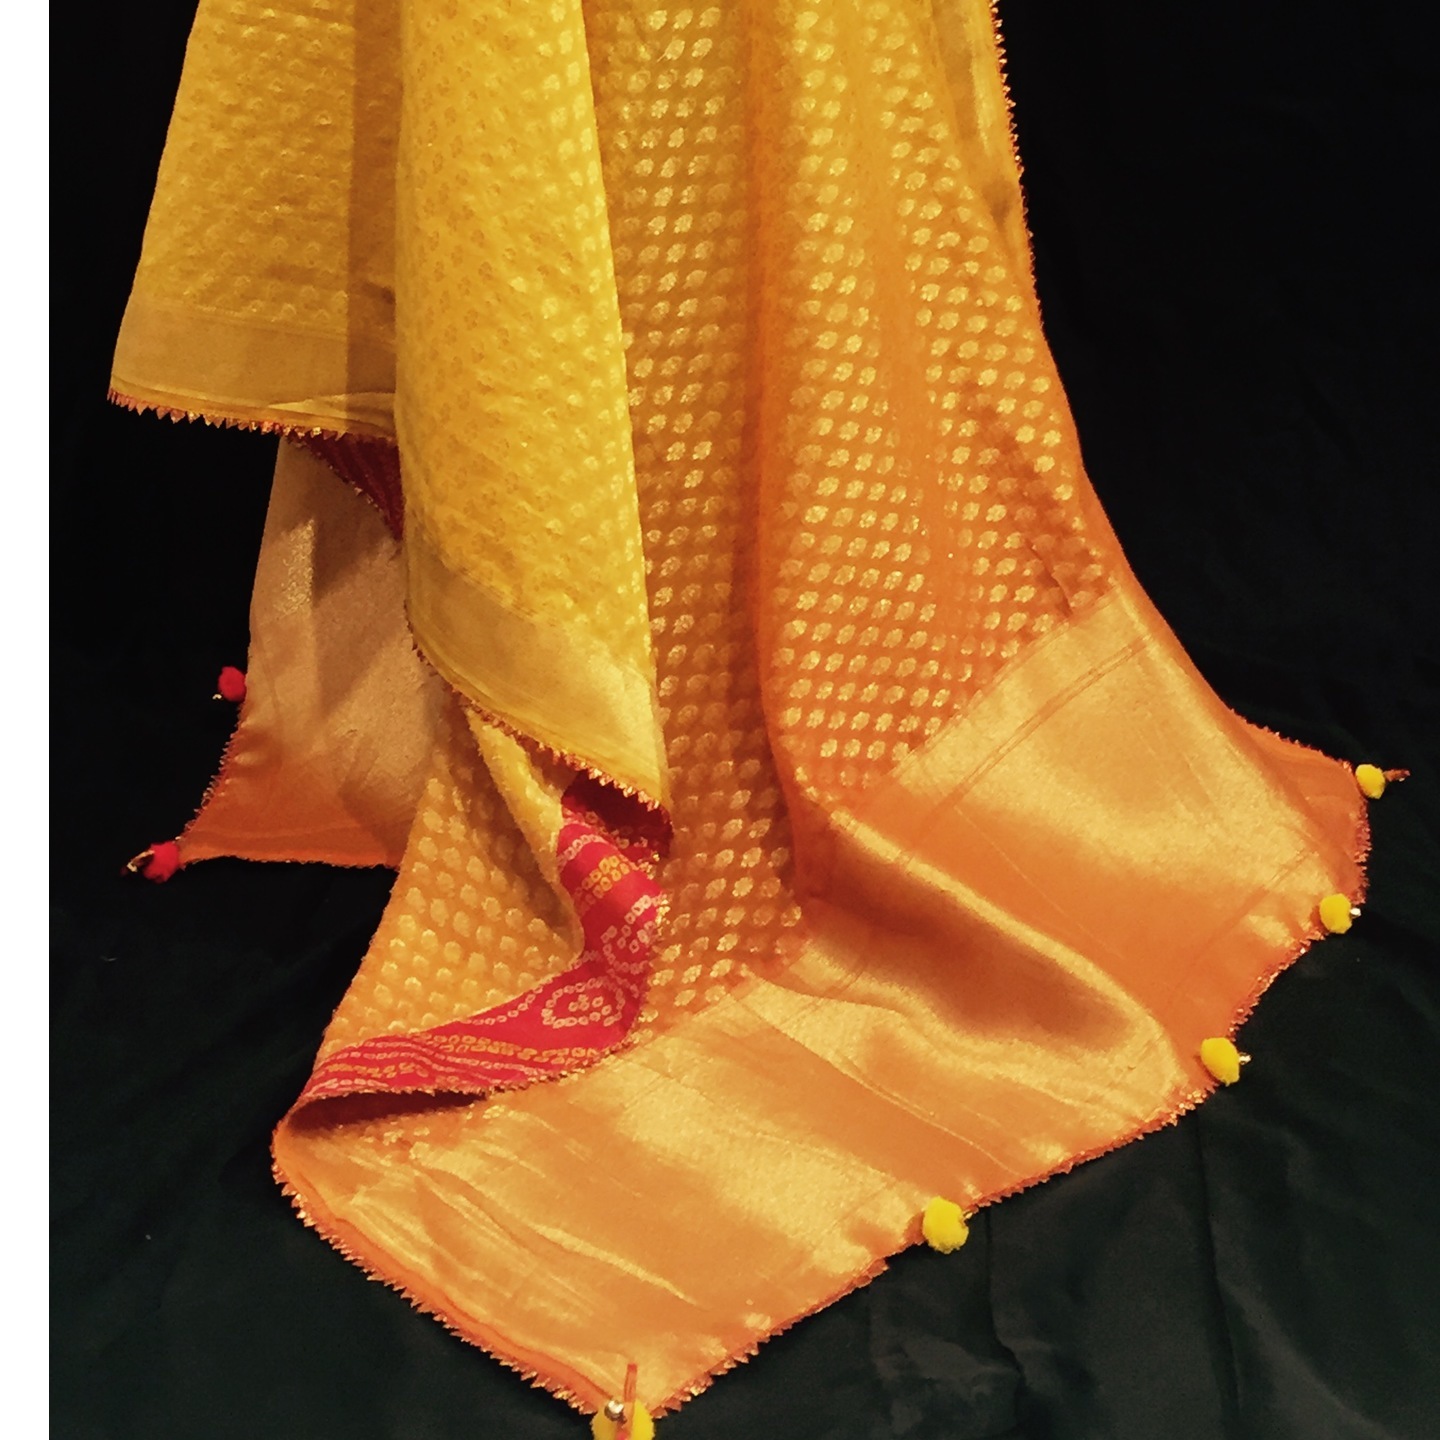 CHANDERI-SILK DUPATTA ombre dyed in mustard-yellow and rust-orange RMS 9148